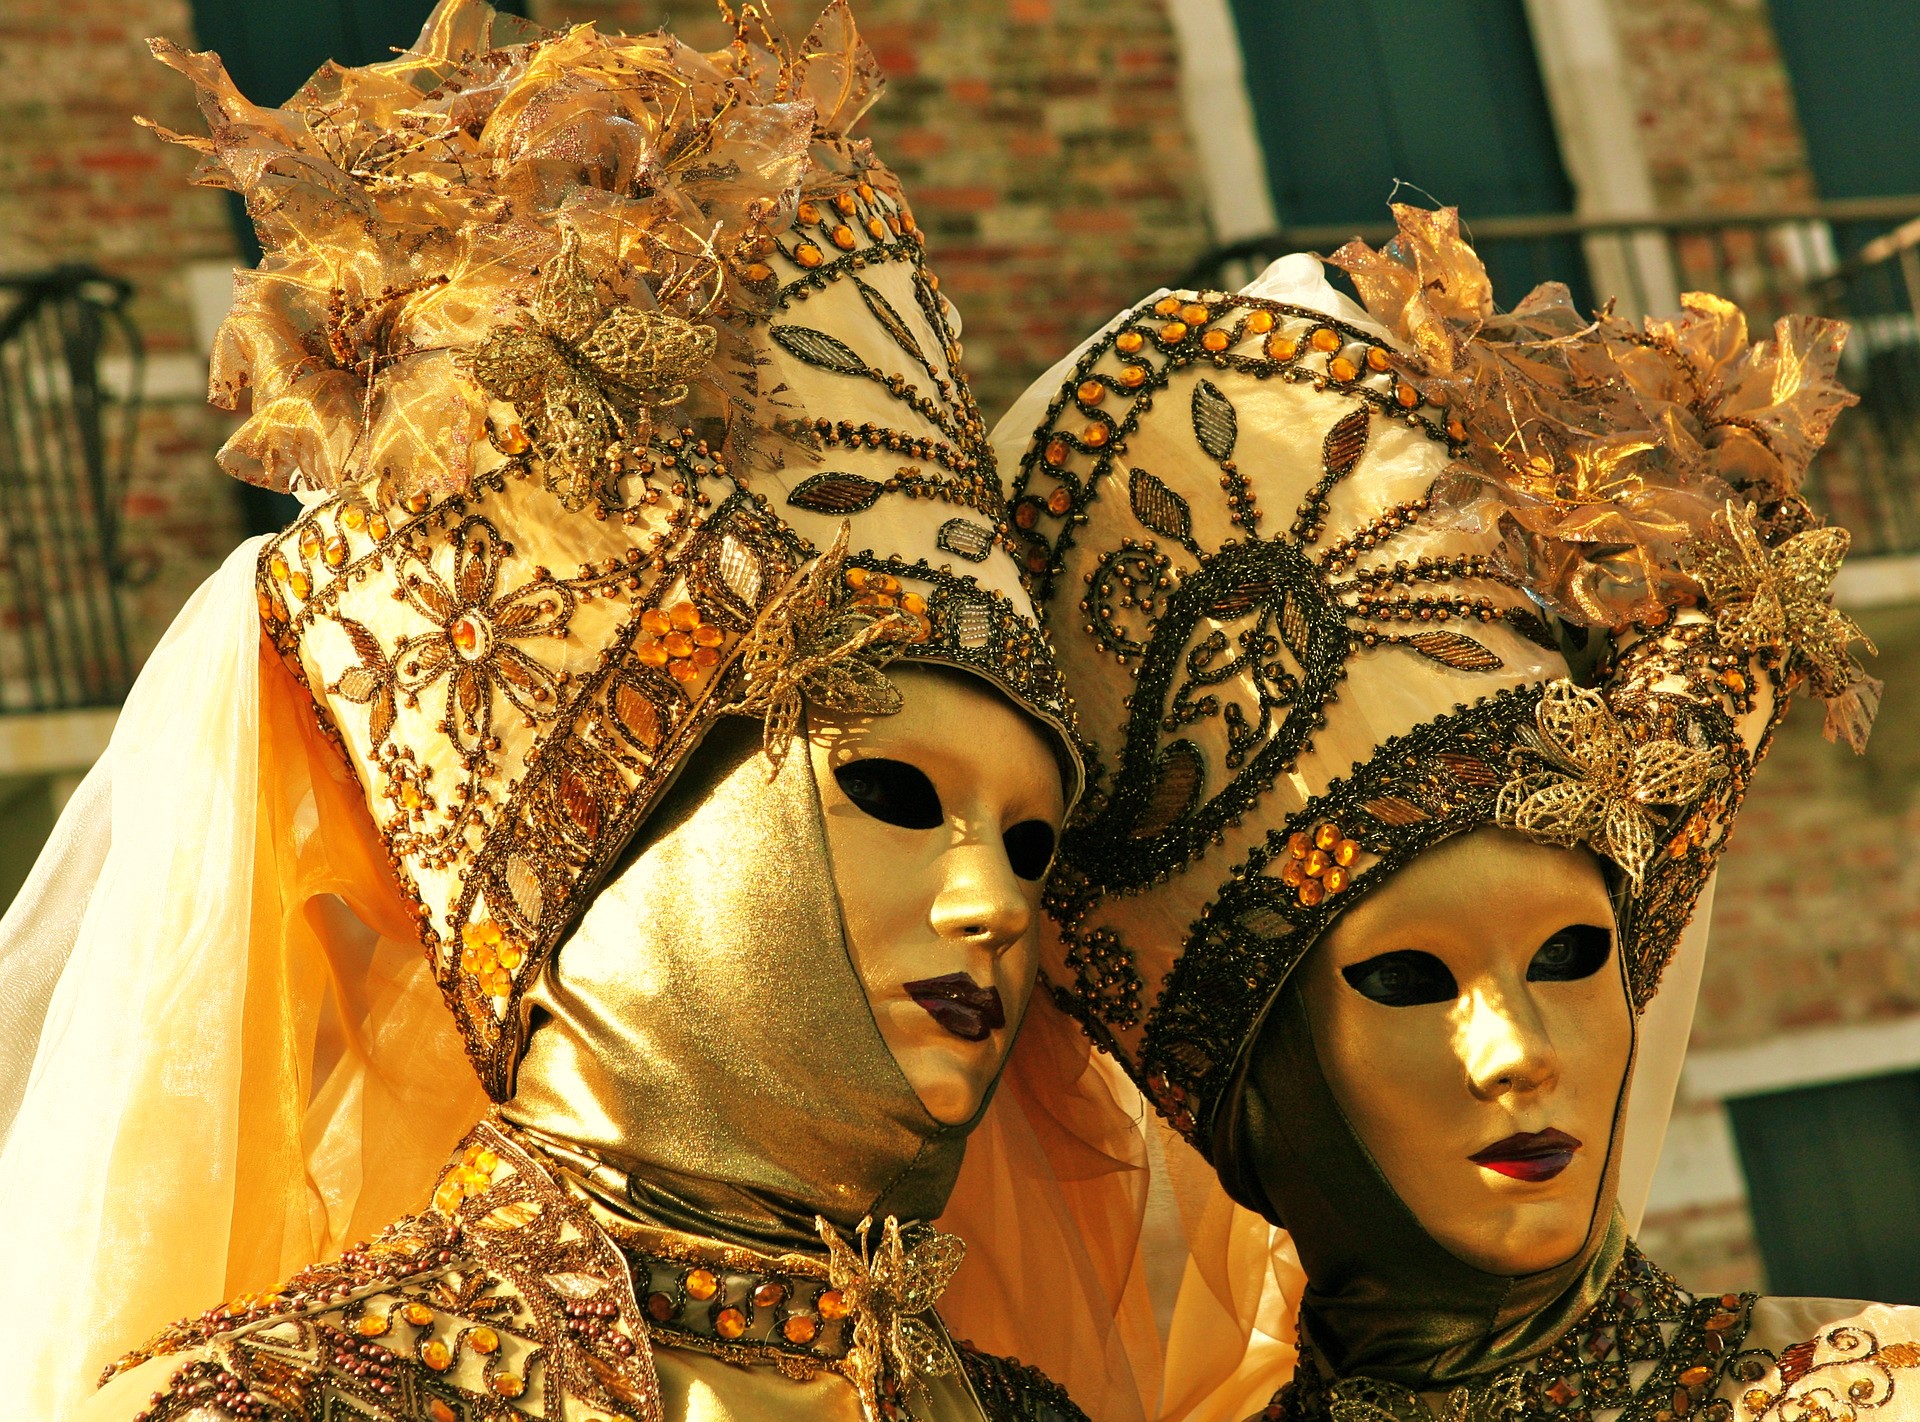 Incredibly ornate costumes and headwear